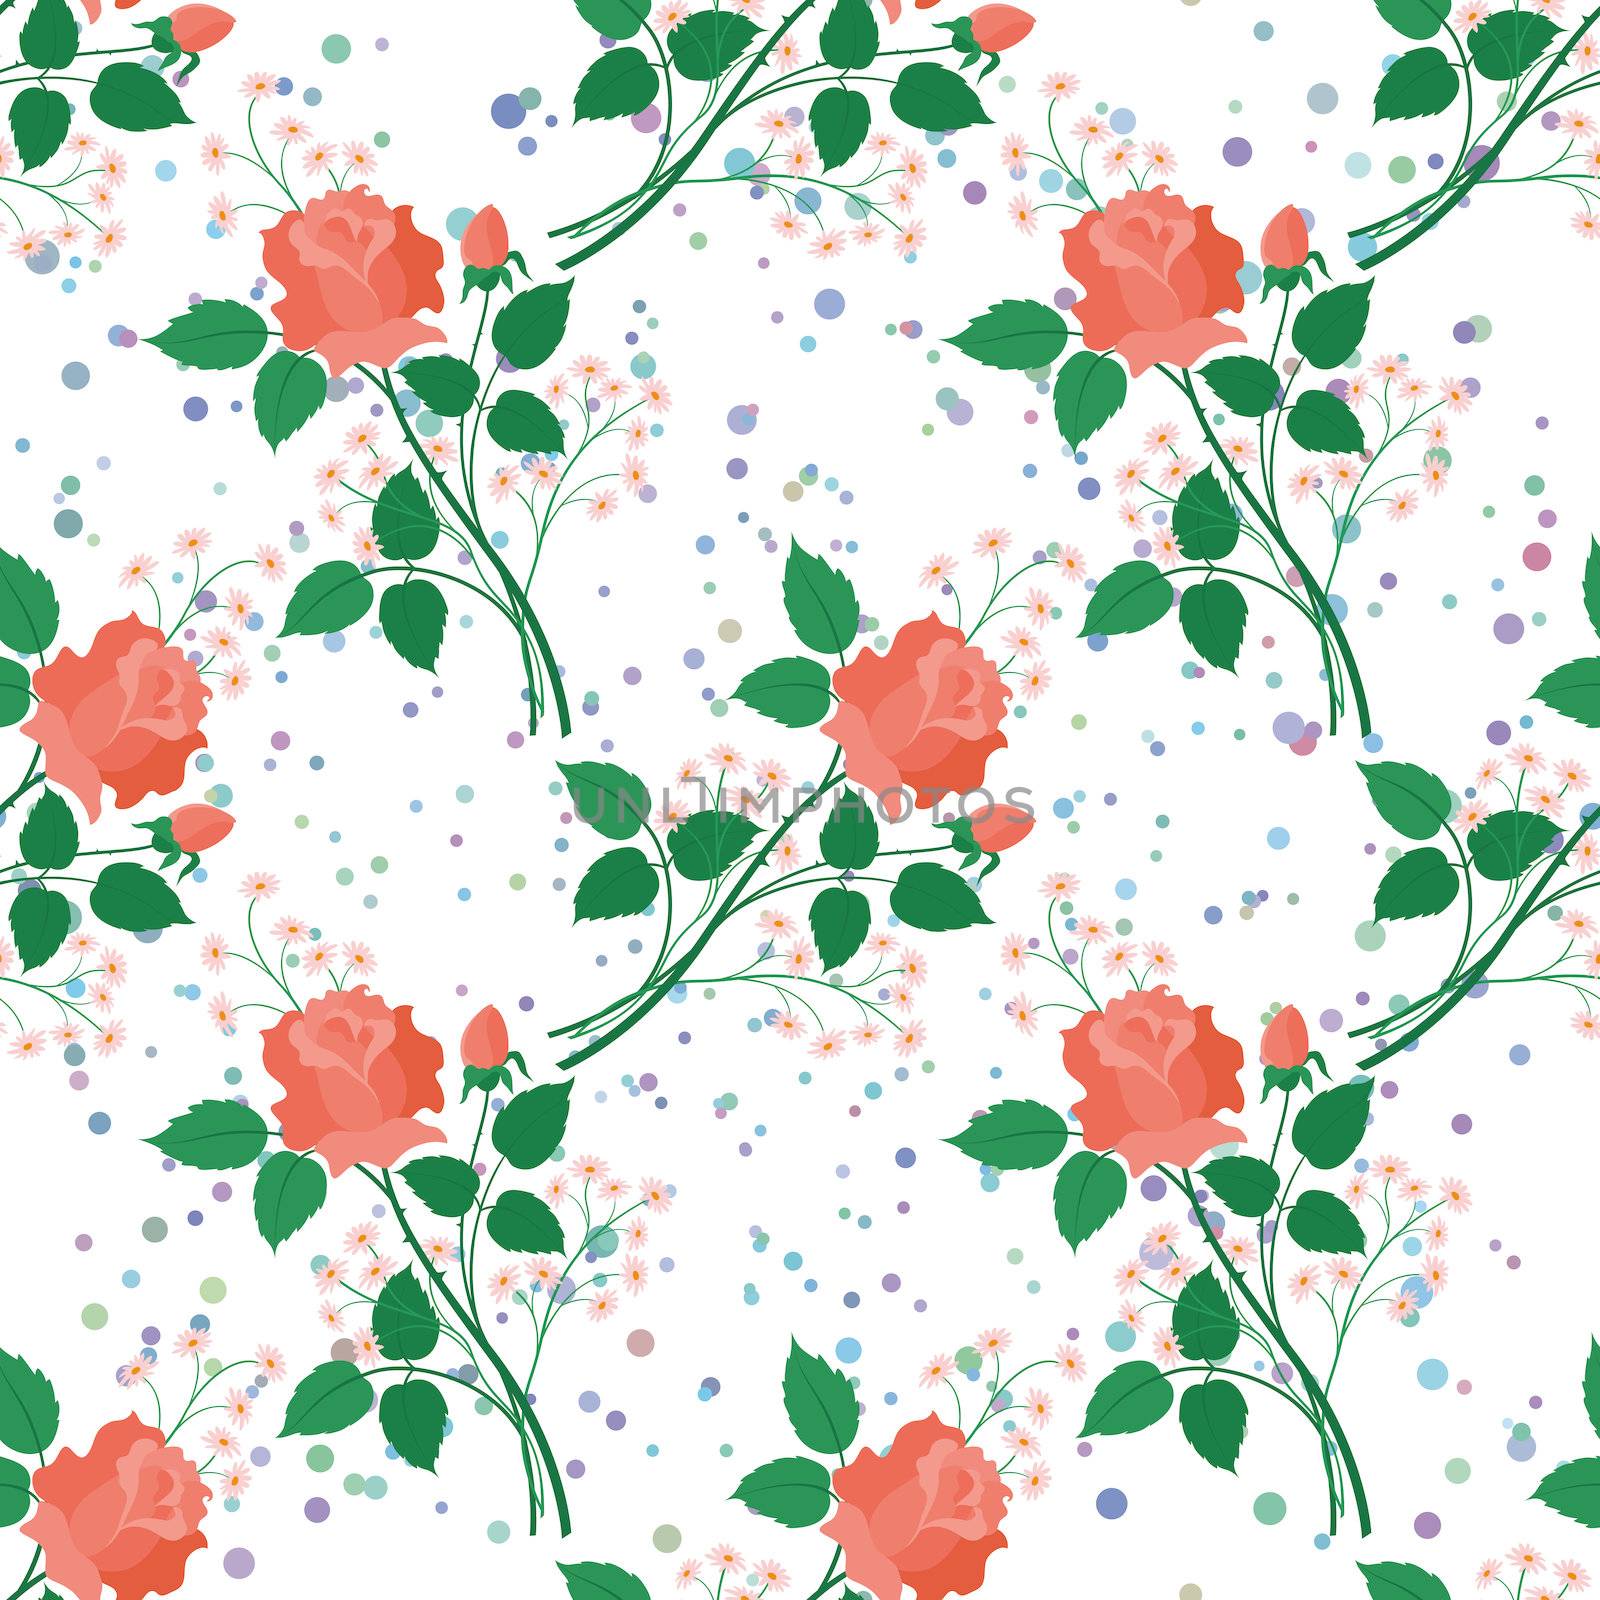 Seamless pattern, roses flowers and leaves on floral background.